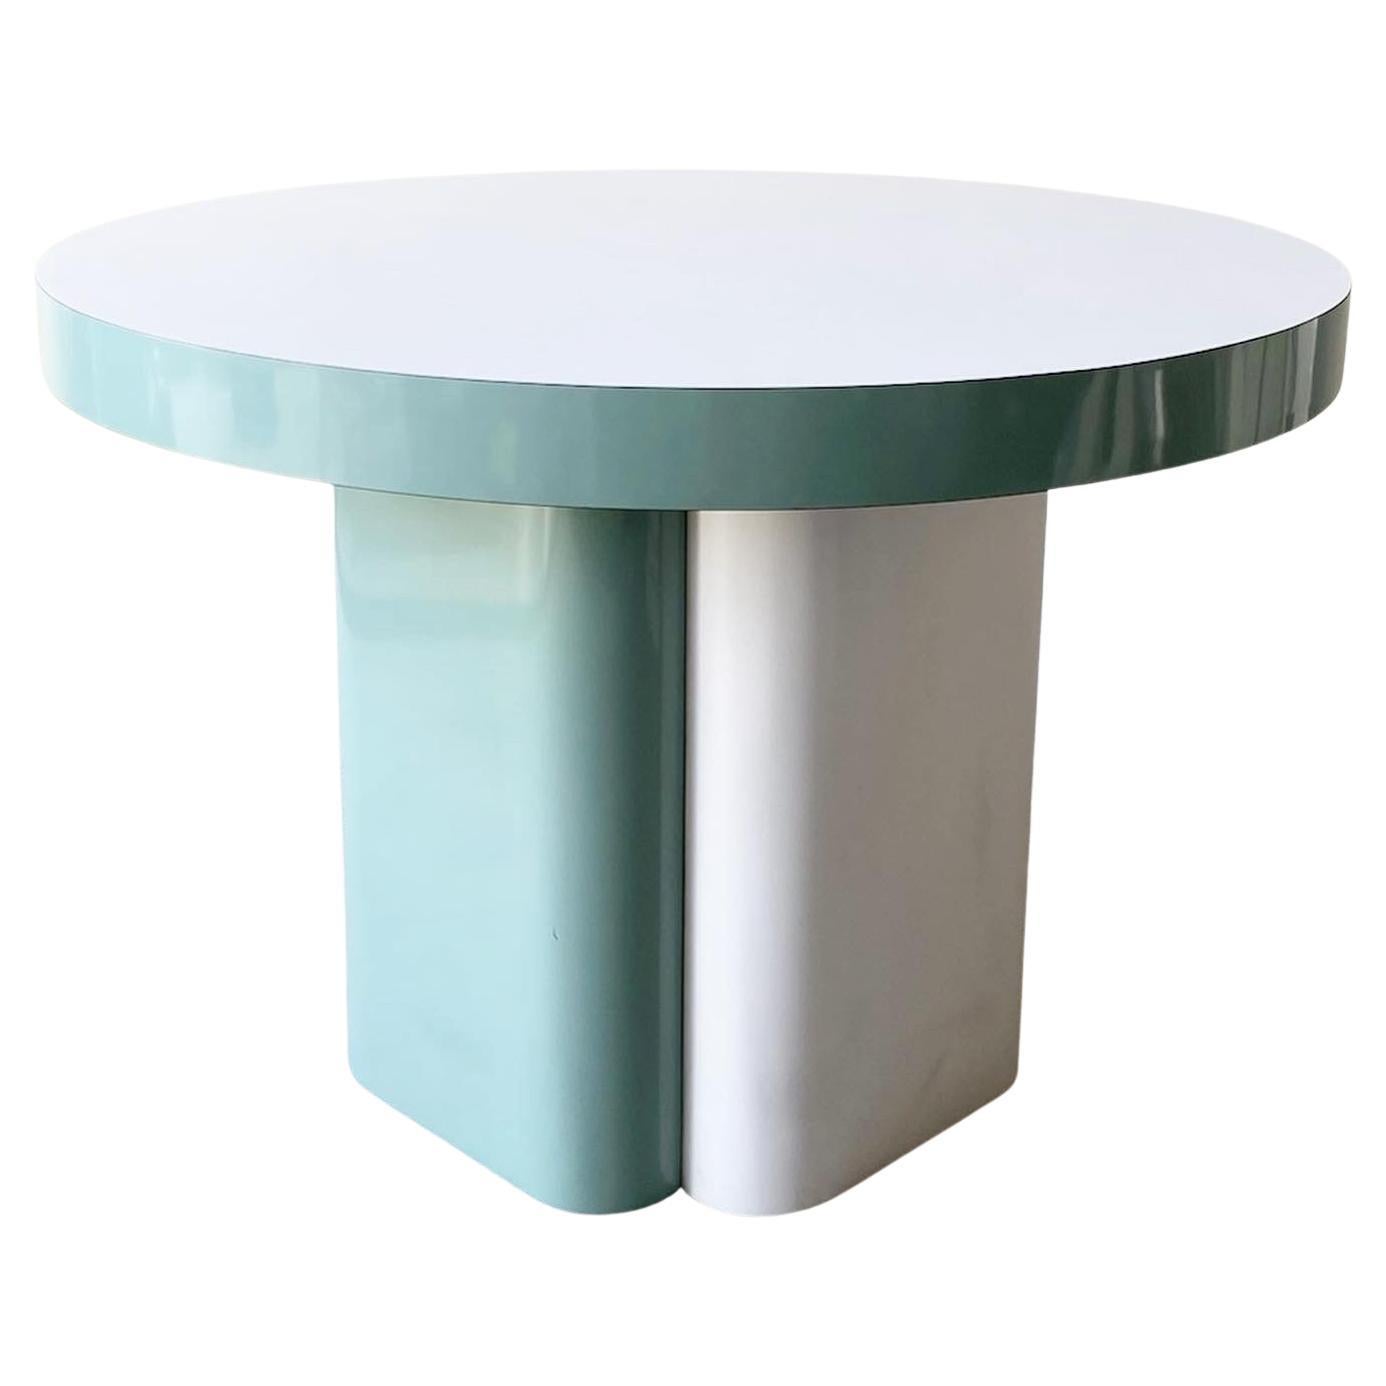 Postmodern Green and White Lacquer Laminate Dining Table